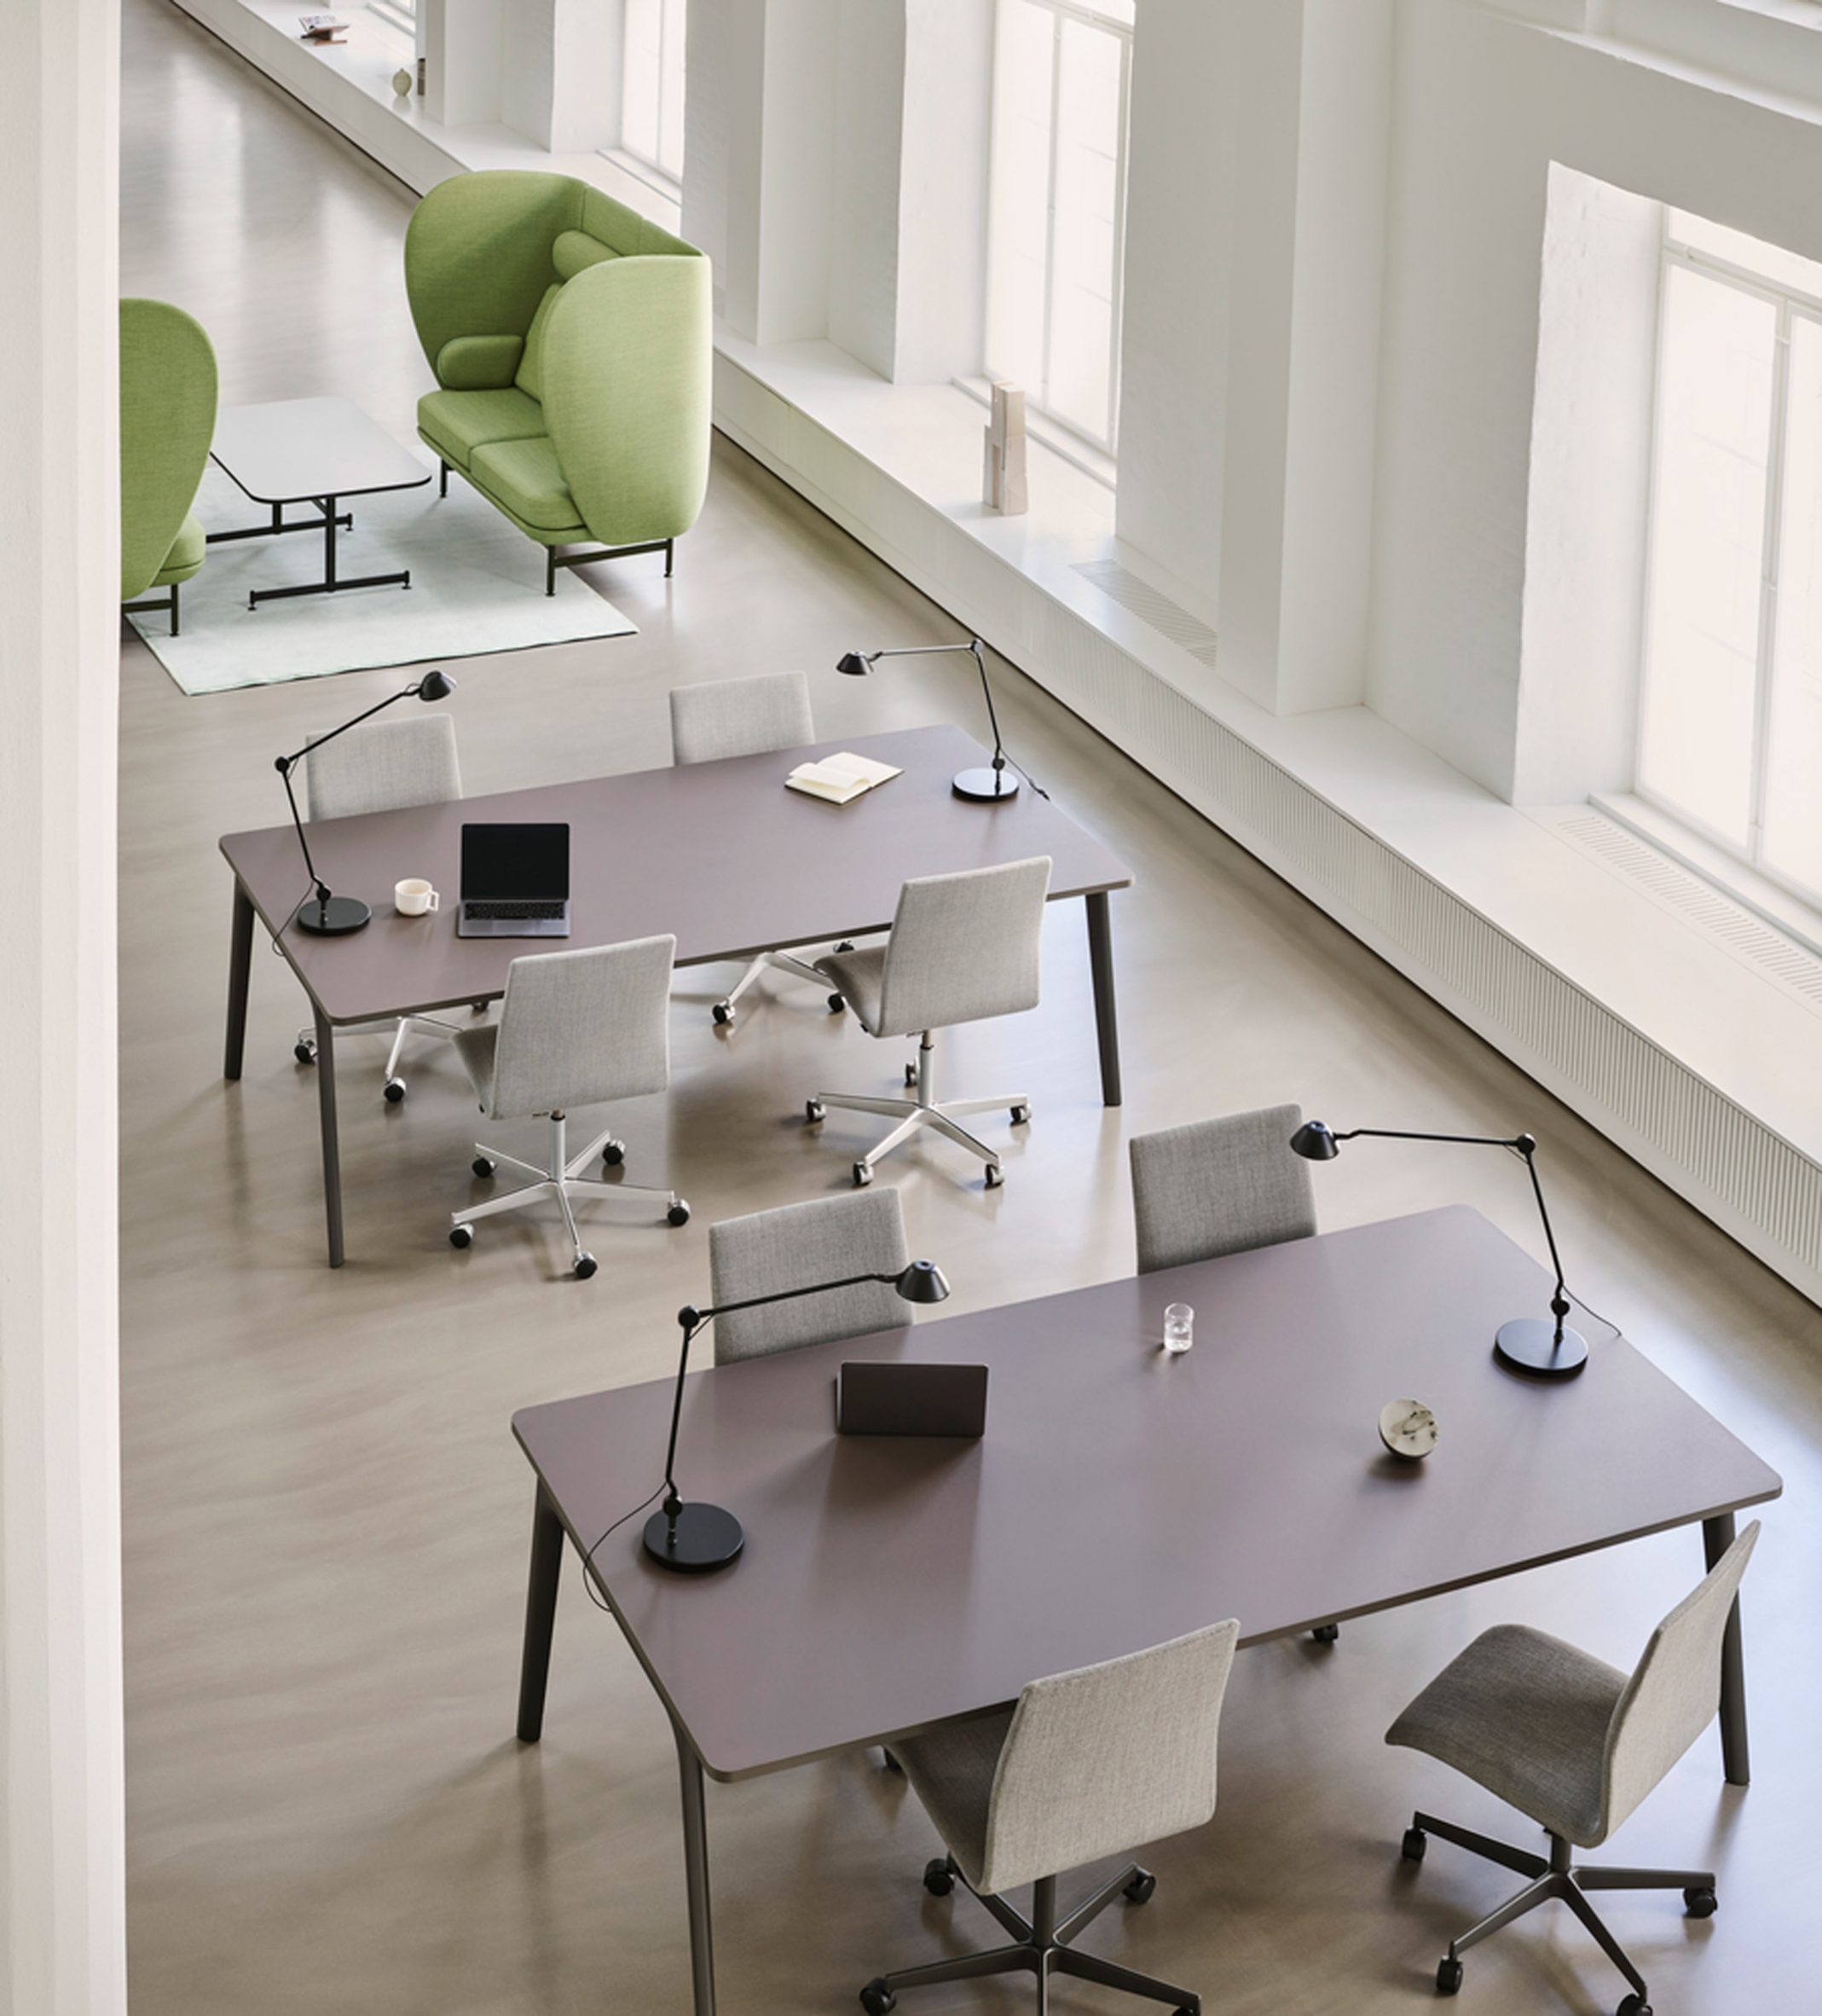 Overhead shot of an office with rectangular Pluralis tables used ask desks paired with light grey chairs